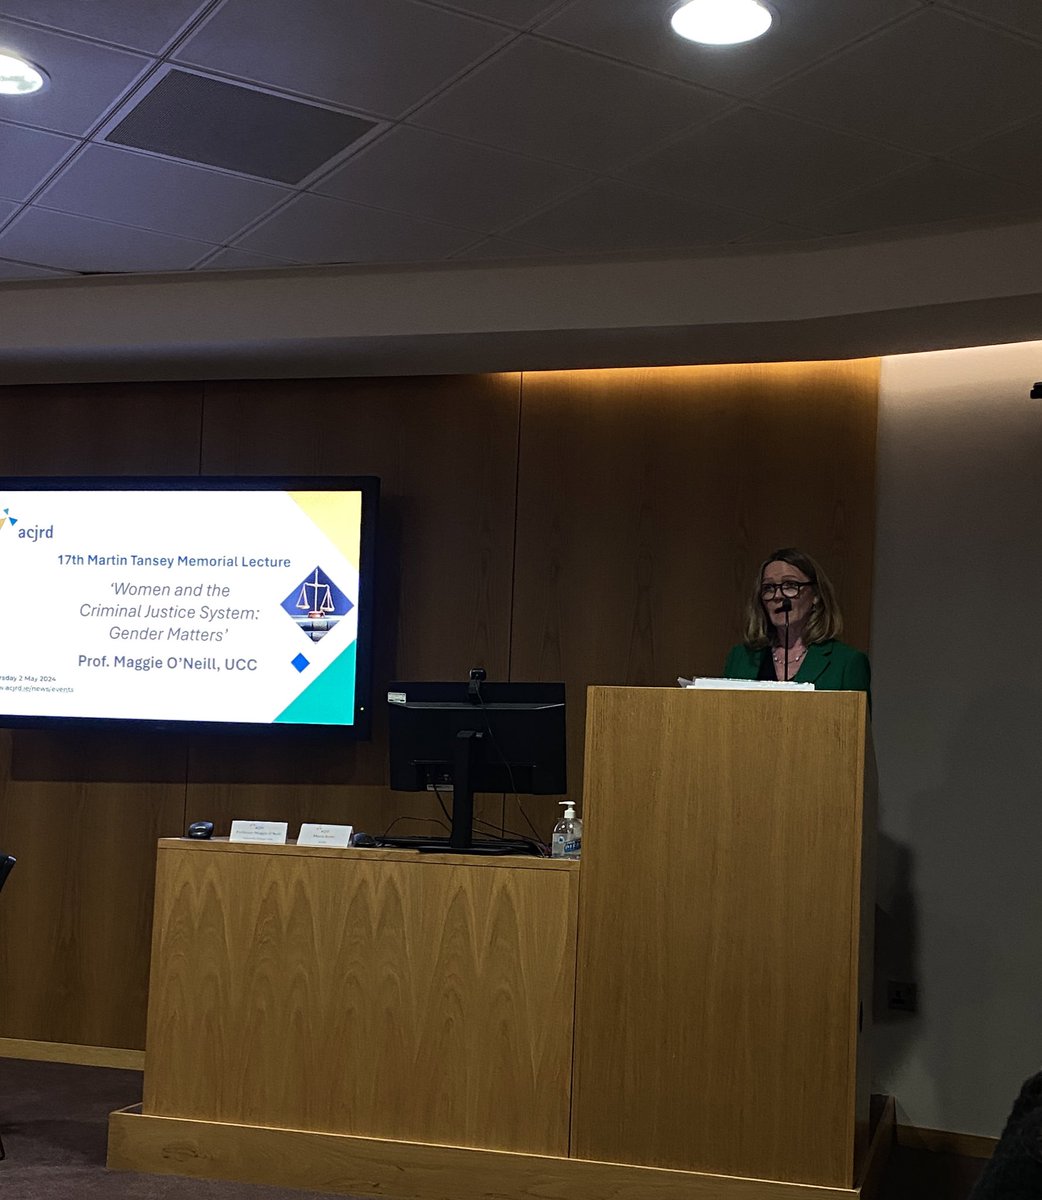 Fantastic @Acjrd_ie lecture by @maggieoneill9 exploring women and the criminal justice system - with an emphasis on the need for a participatory, imaginative criminology that uses creative methods to meet people where they are at to build our collective social future together.